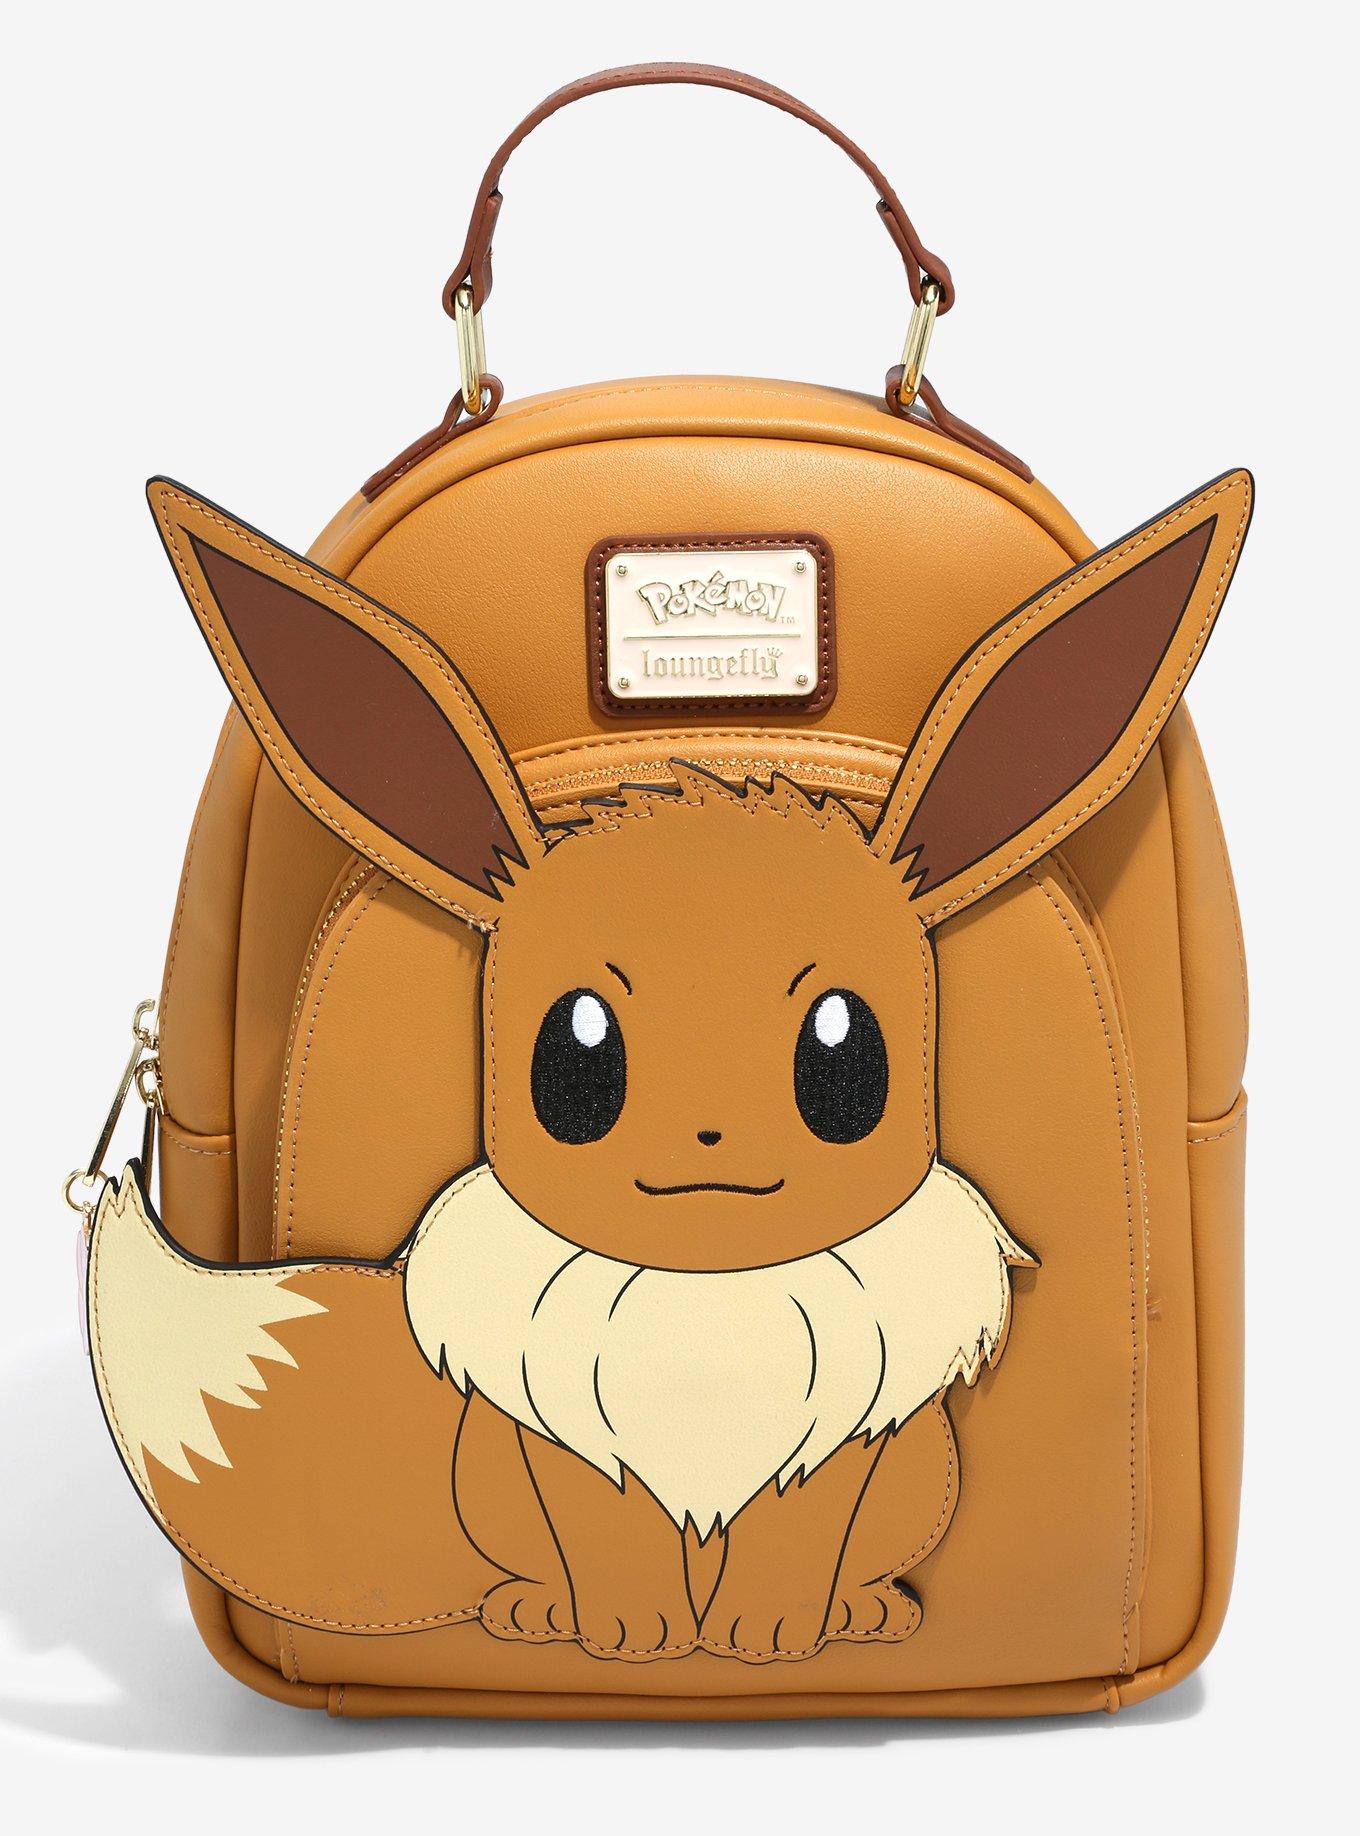 Loungefly - Pokémon Pikachu Backpack, Purse, Wallet - EB Games Exclusive 